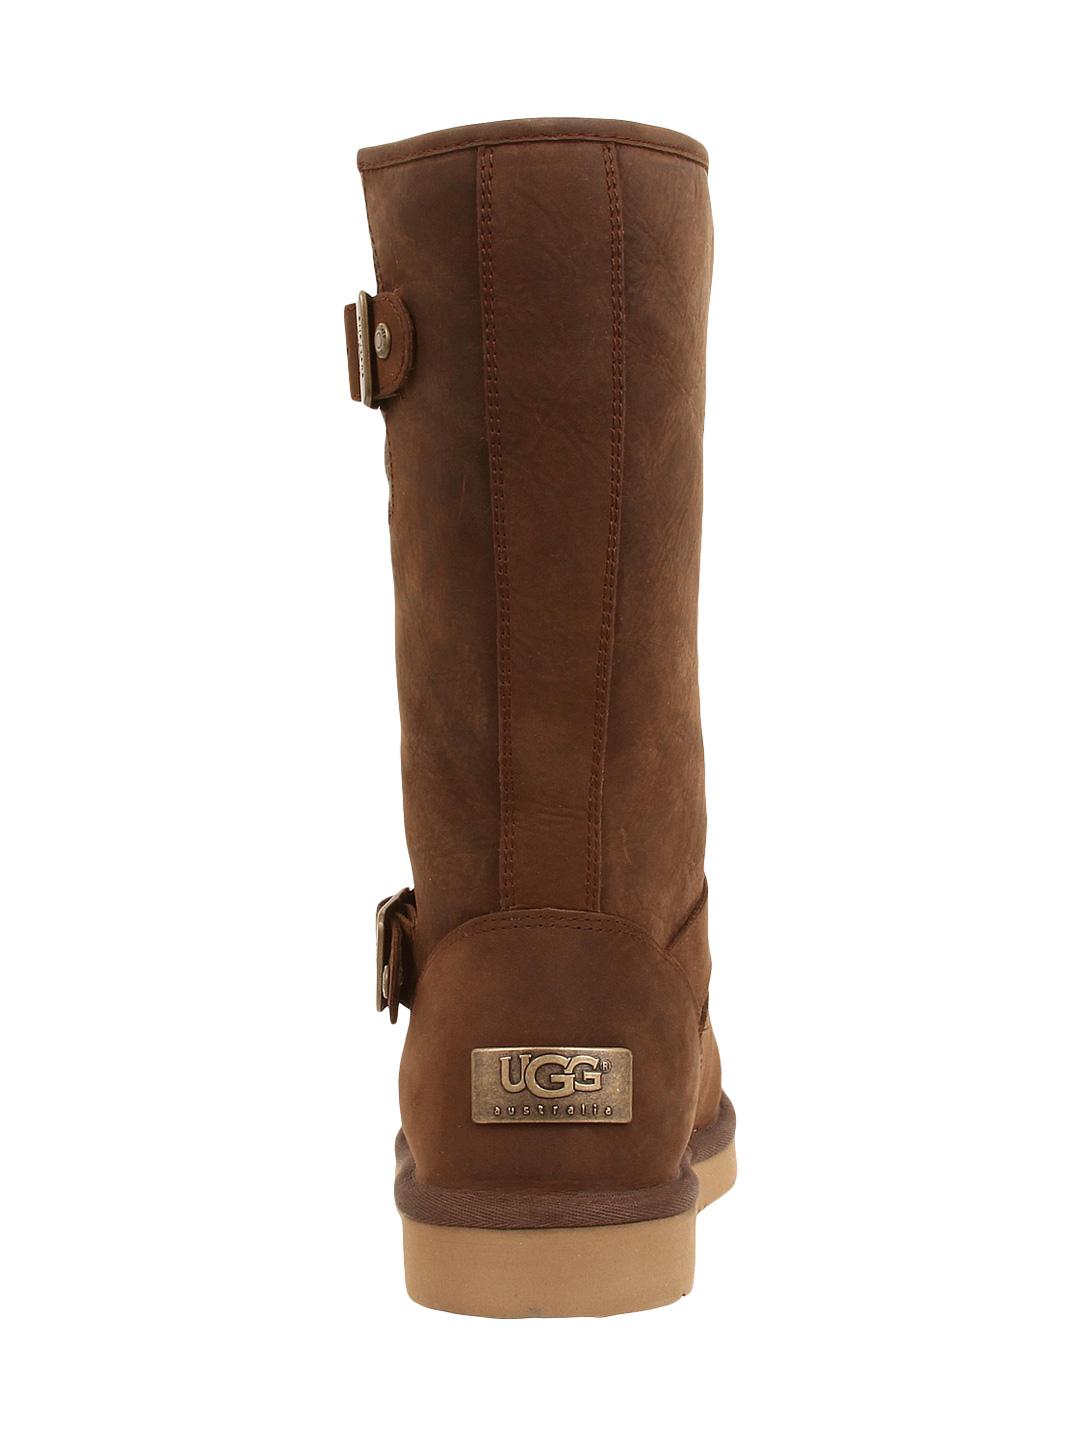 UGG Sutter Leather & Uggpure Boot in Brown - Lyst